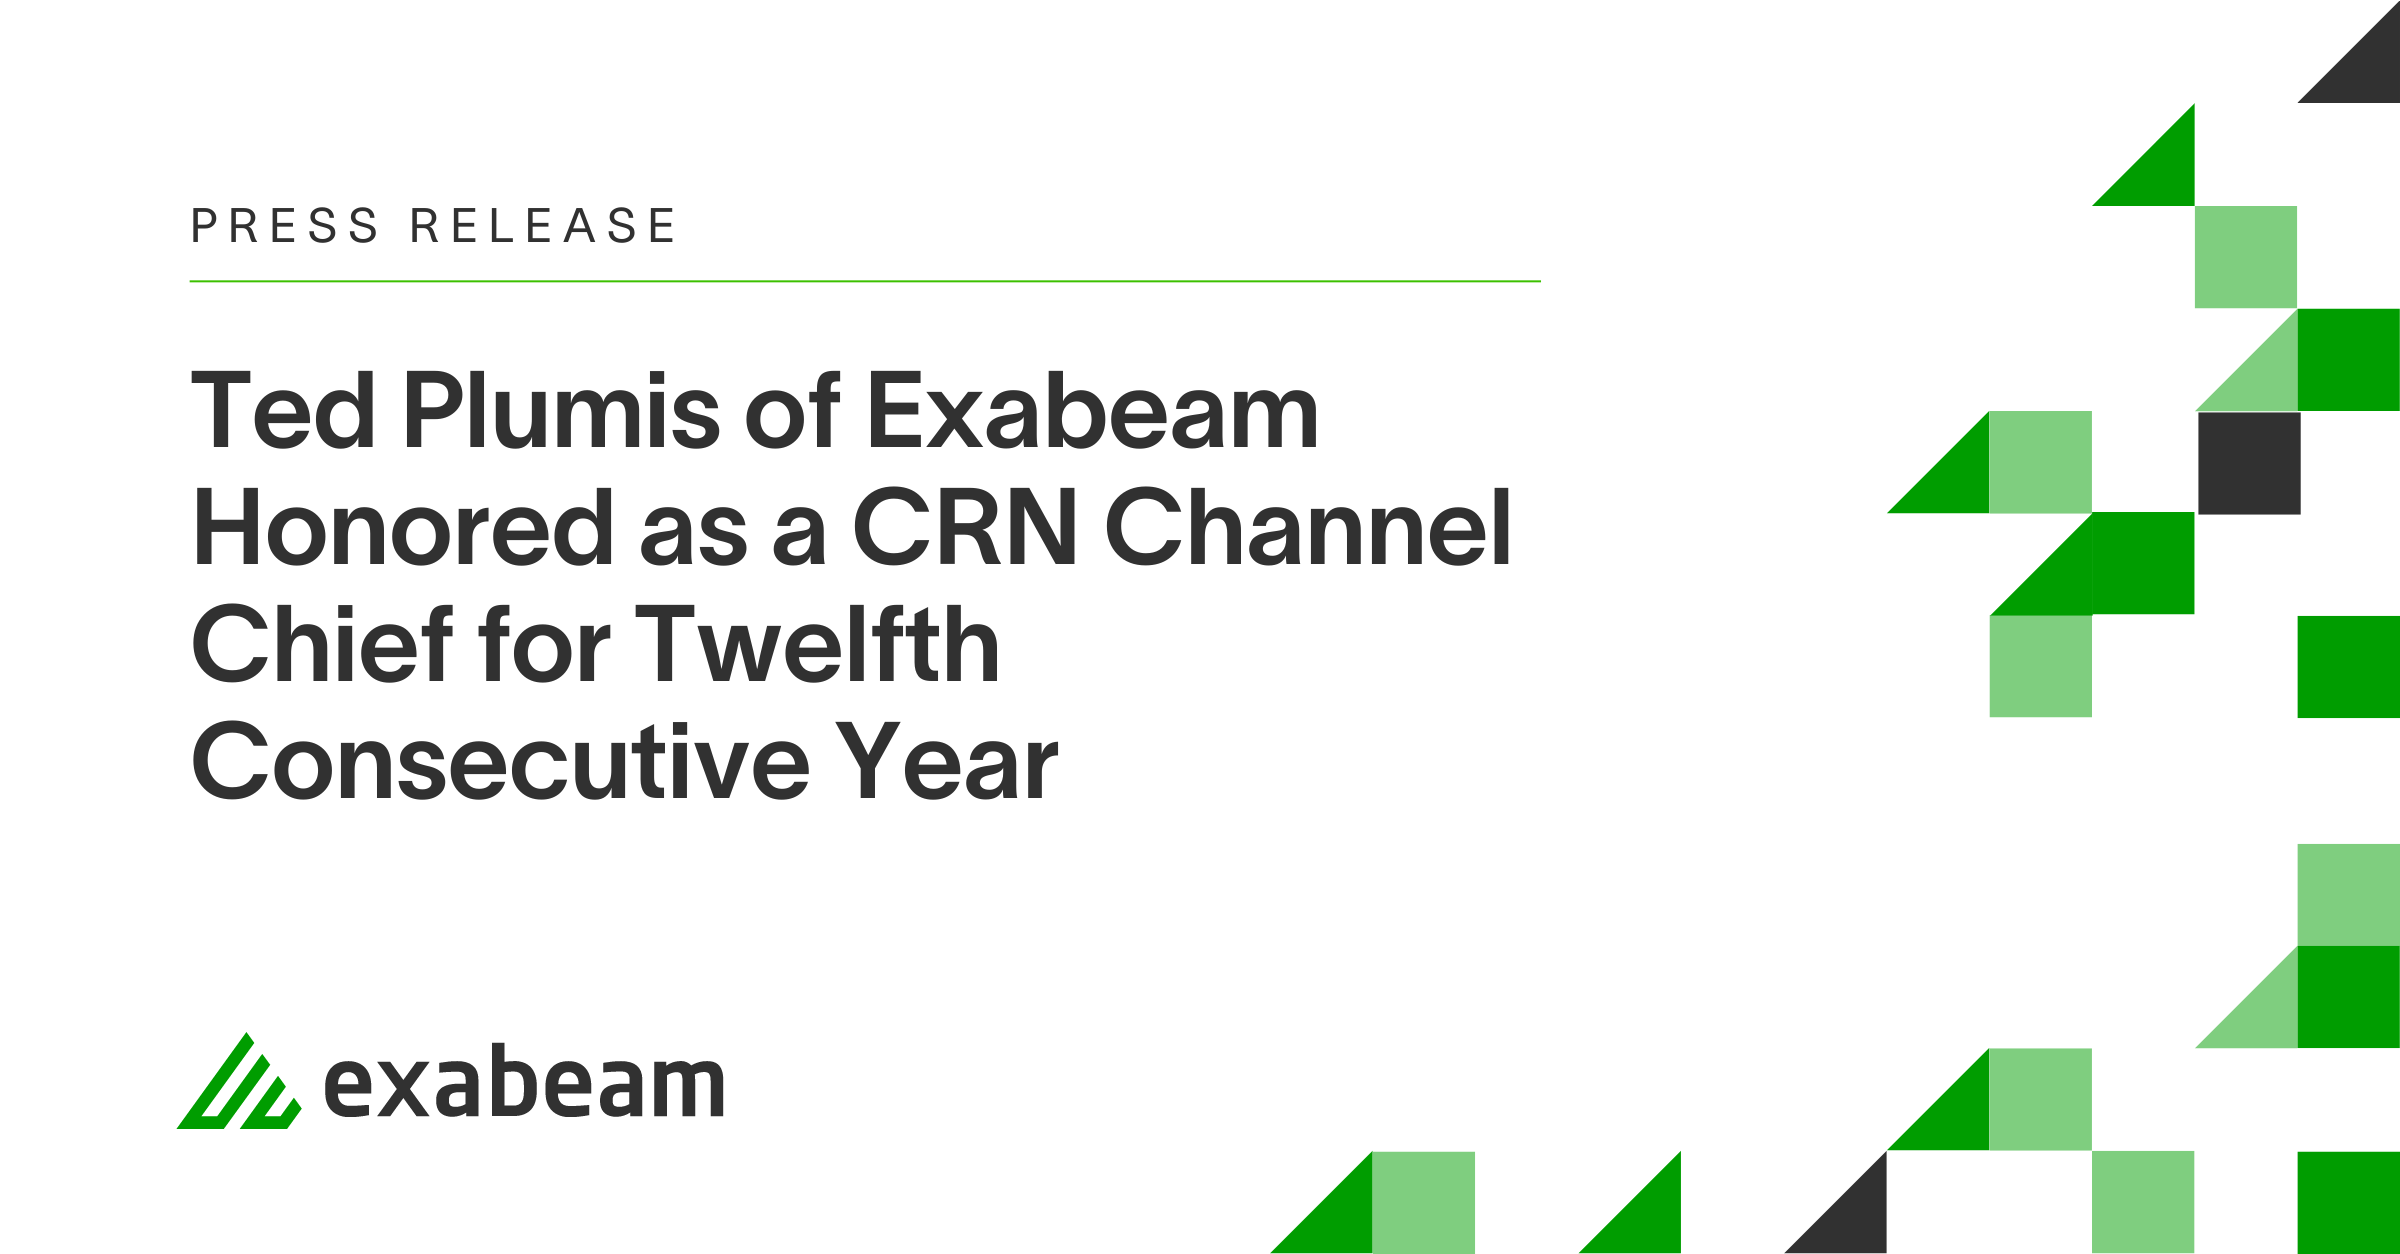 Ted Plumis of Exabeam Honored as a CRN Channel Chief for Twelfth Consecutive Year